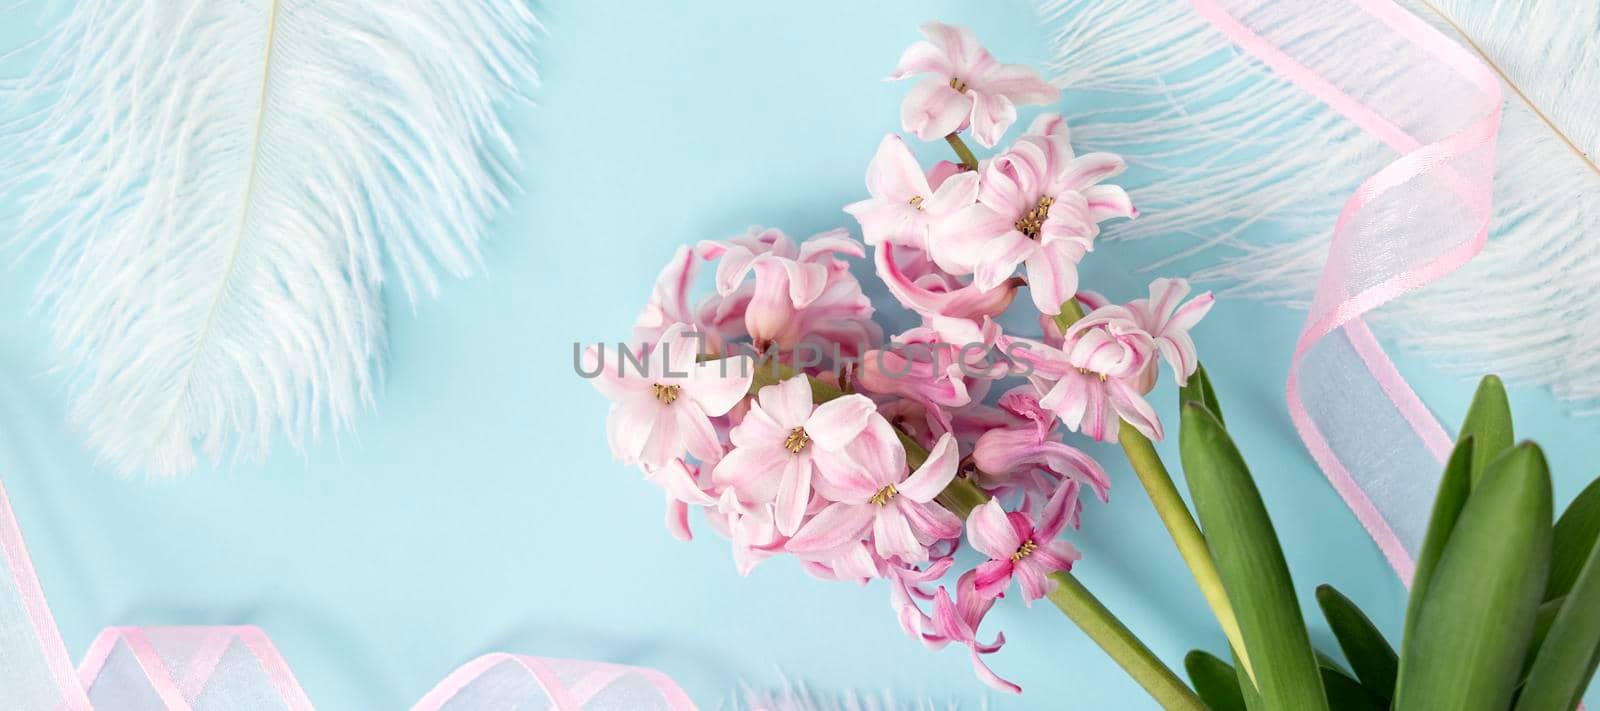 banner with pink hyacinth flowers with white feathers on pastel blue or cyan colors with pink ribbon. Spring coming concept. Spring or summer background. by Leoschka